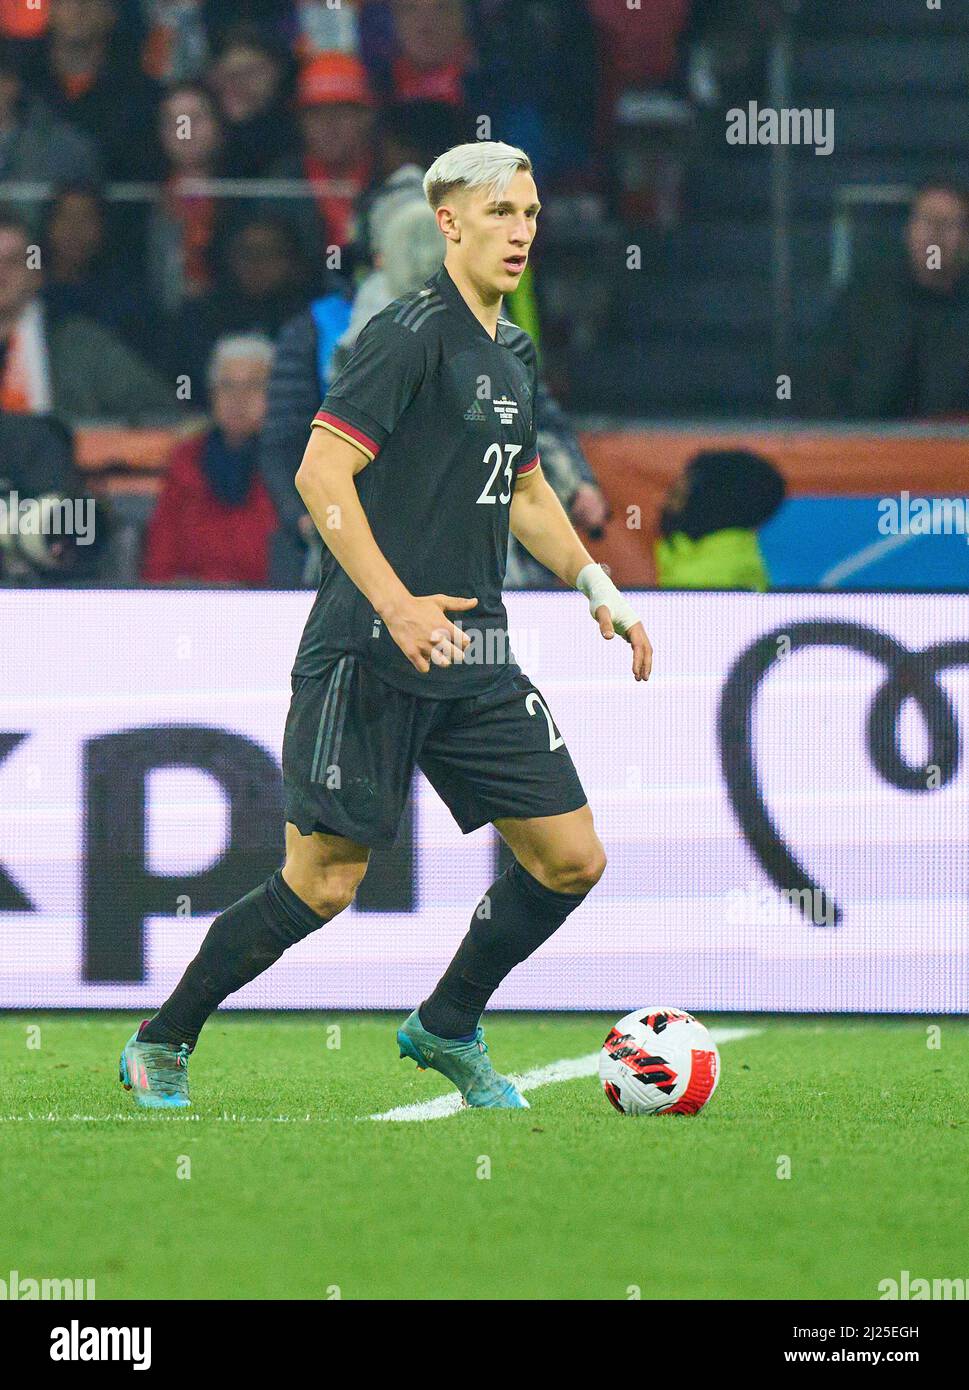 Amsterdam, Netherlands. 29th Mar, 2022. Nico Schlotterbeck, DFB 23  in the friendly match NETHERLANDS - GERMANY 1-1 Preparation for World Championships 2022 in Qatar ,Season 2021/2022, on Mar 29, 2022  in Amsterdam, Netherlands.  © Peter Schatz / Alamy Live News Credit: Peter Schatz/Alamy Live News Stock Photo